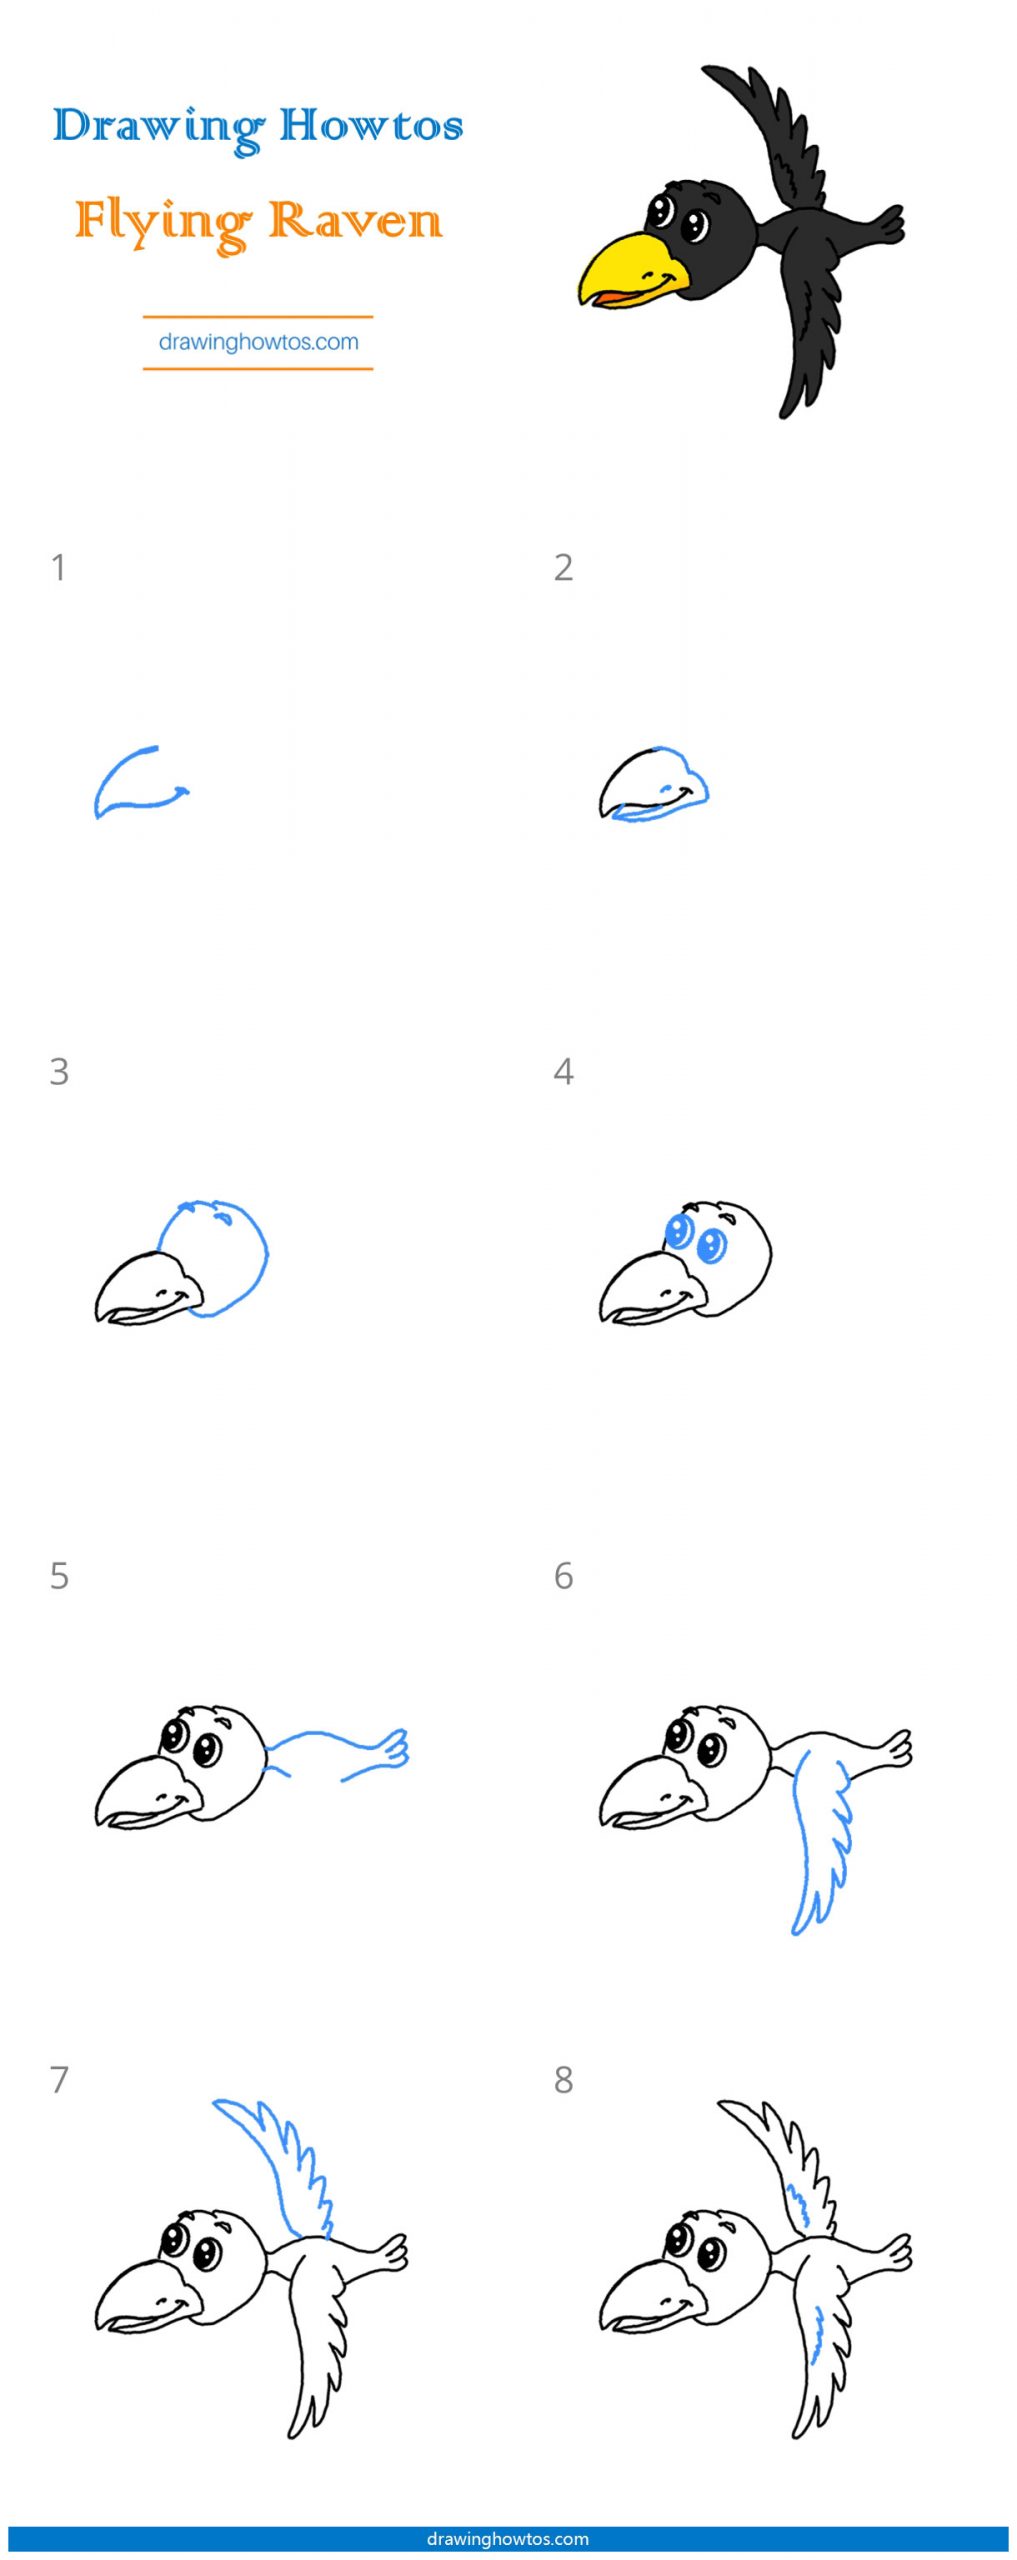 How to Draw a Flying Raven (or Crow) Step by Step